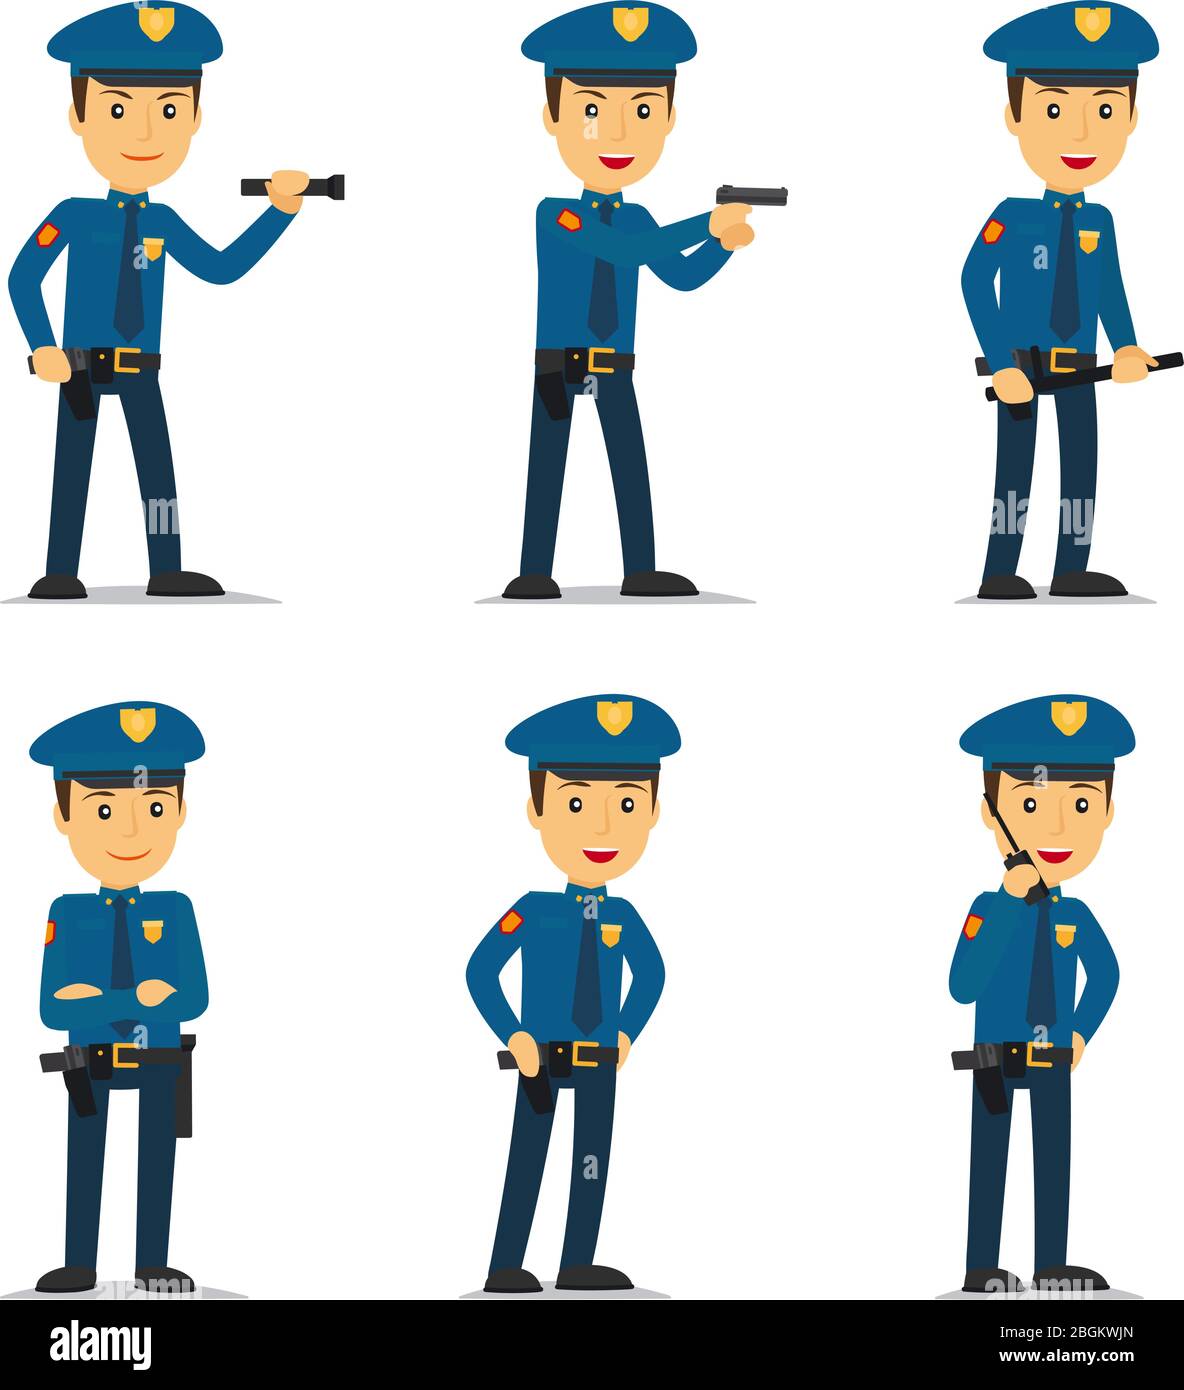 Police officer character in different poses. Vector illustration. Stock Vector